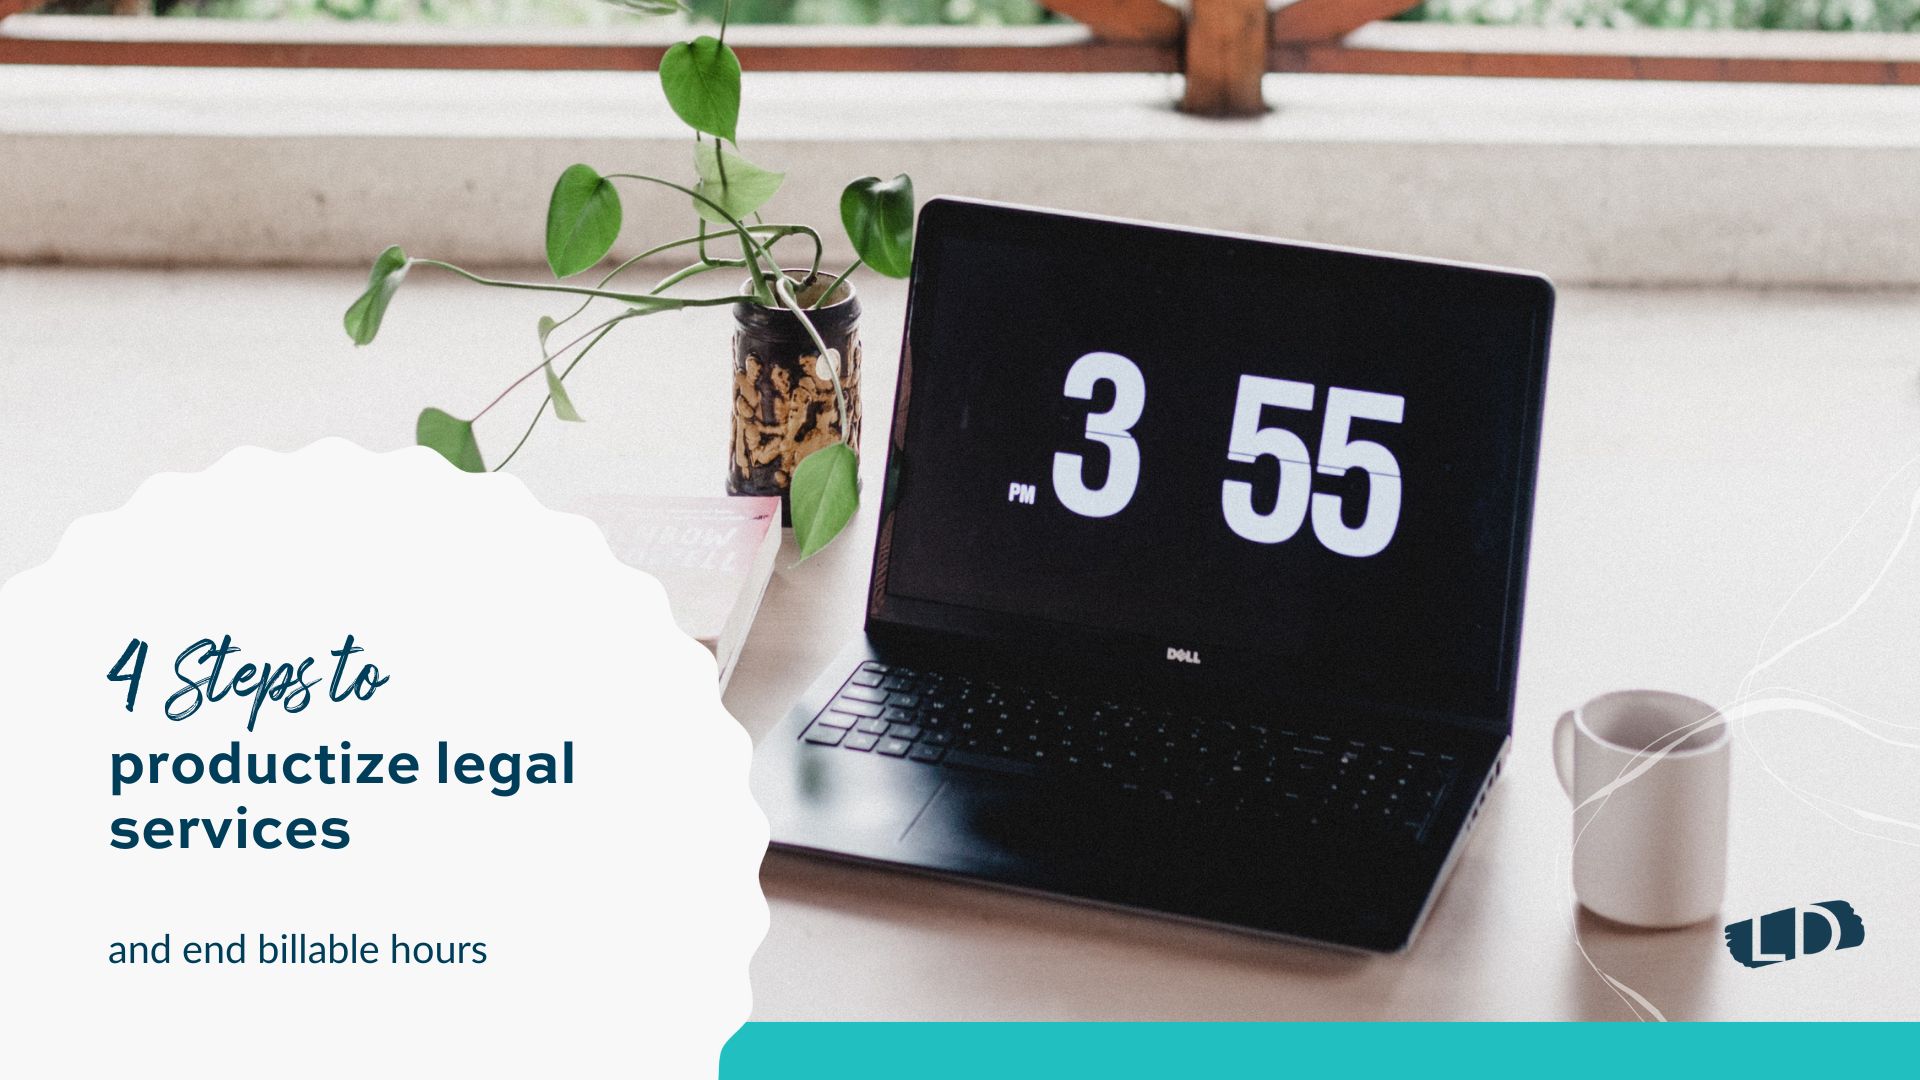 4 Steps to Productize Legal Services and End Billable Hours